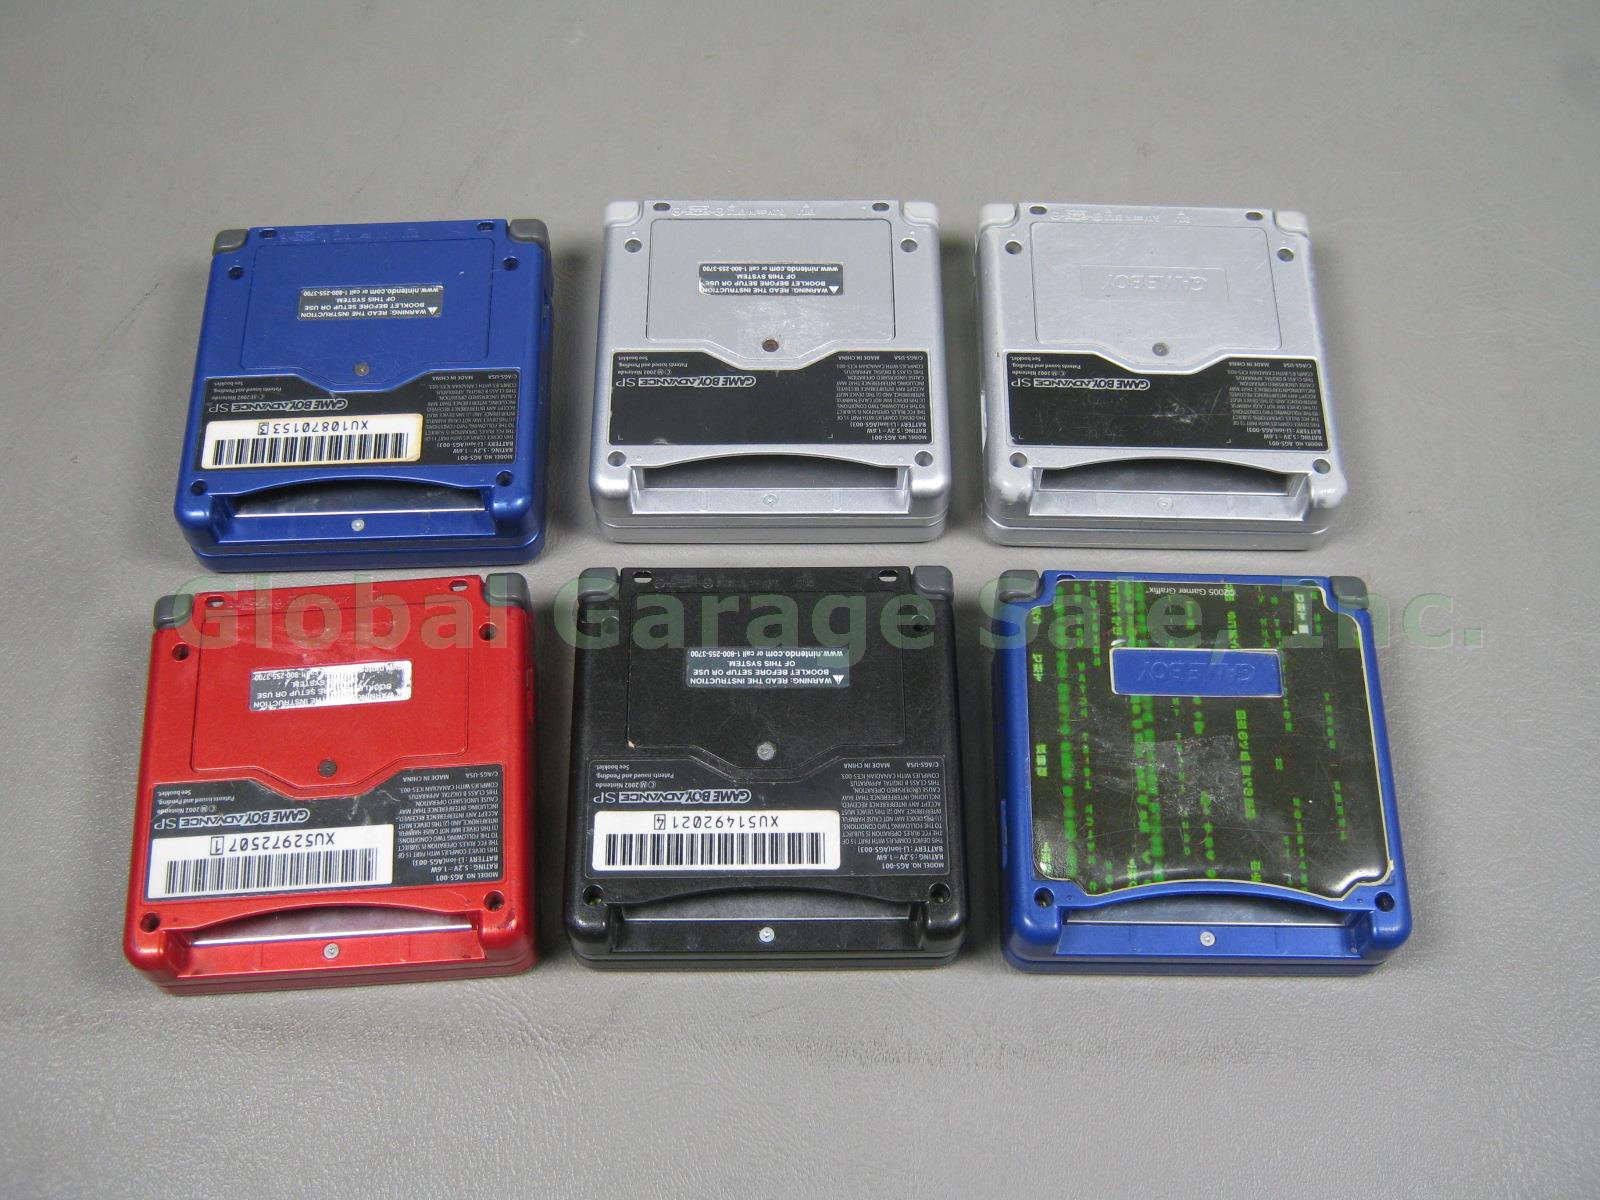 6 Nintendo Gameboy Advance GBA SP AGS-001 Consoles System Collection Bundle Lot 2